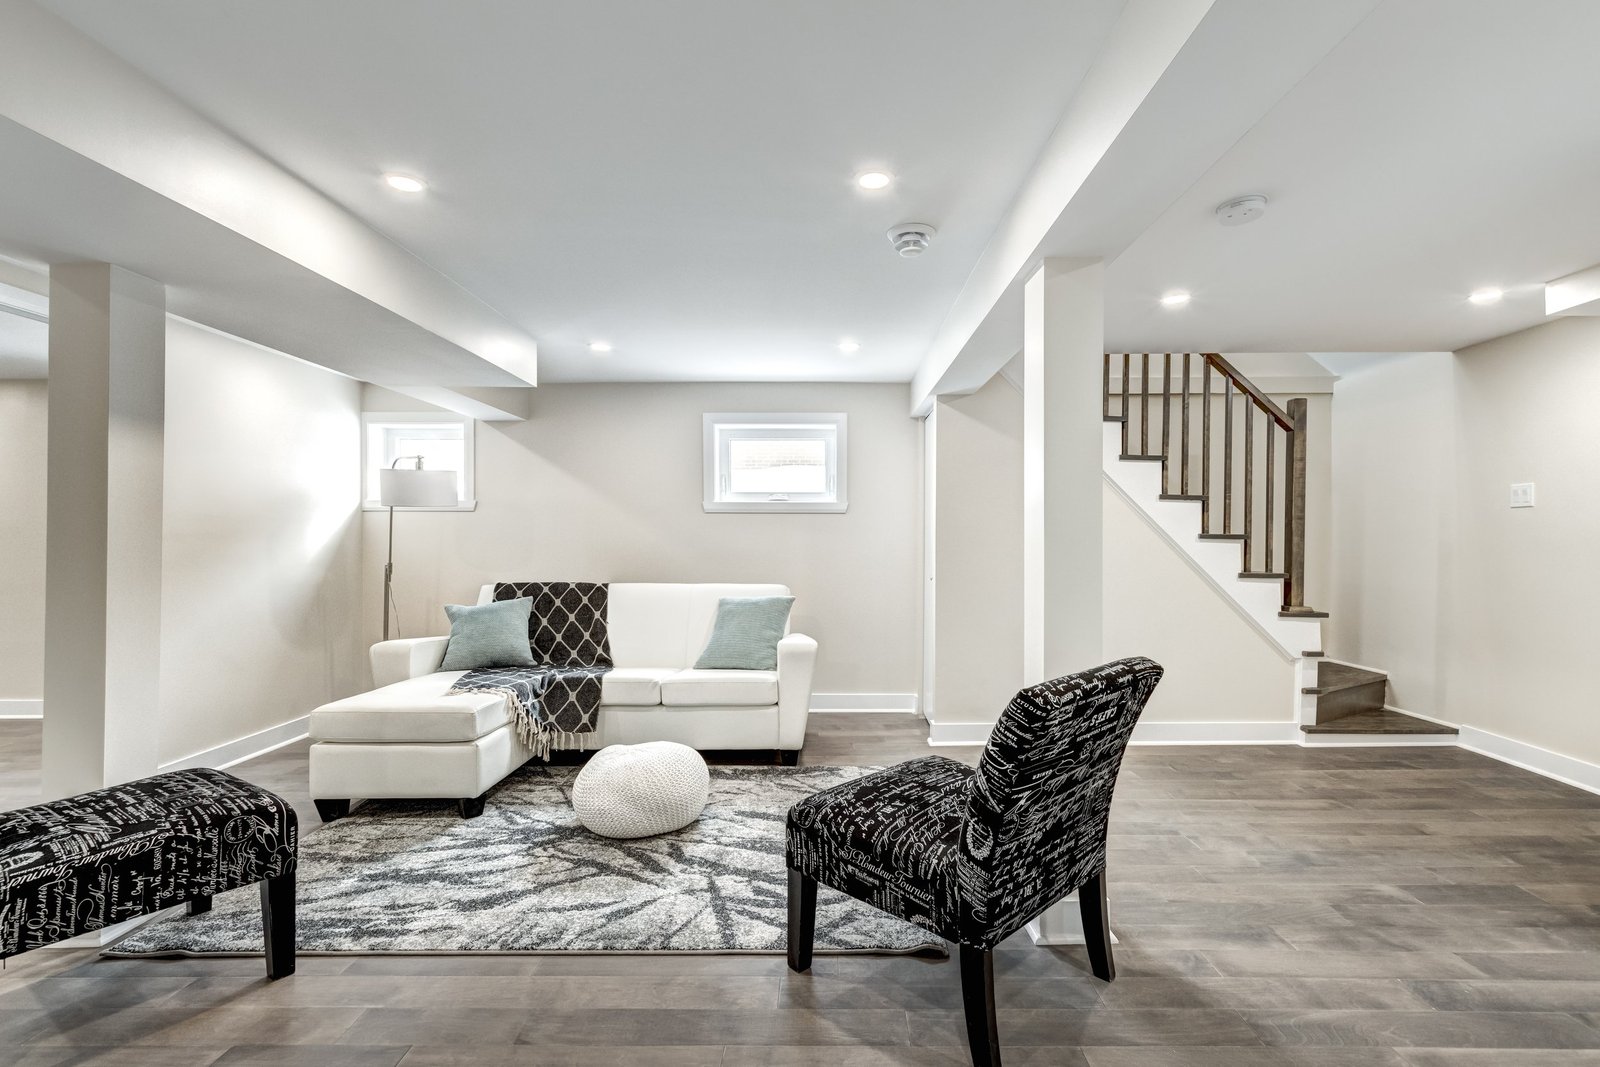  Basement Renovation vs. Moving: 8 Insights From The Basement Builders In Calgary